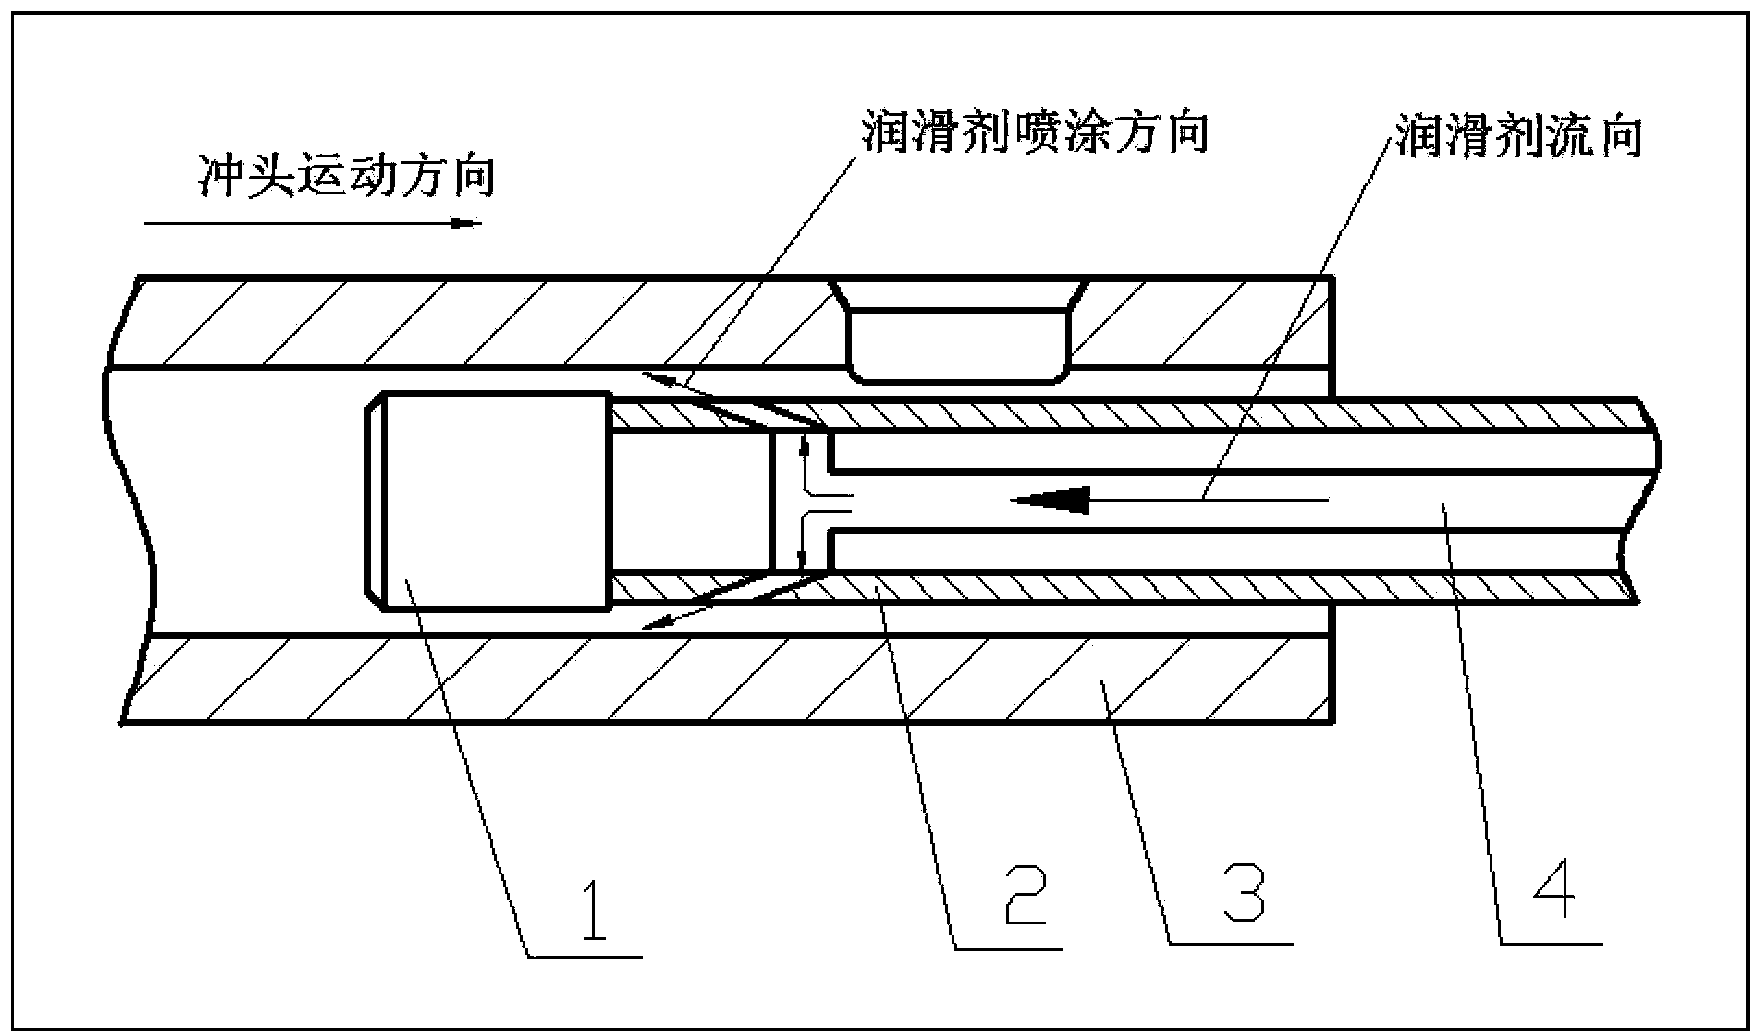 Pressure chamber lubrication method and device of die-casting machine